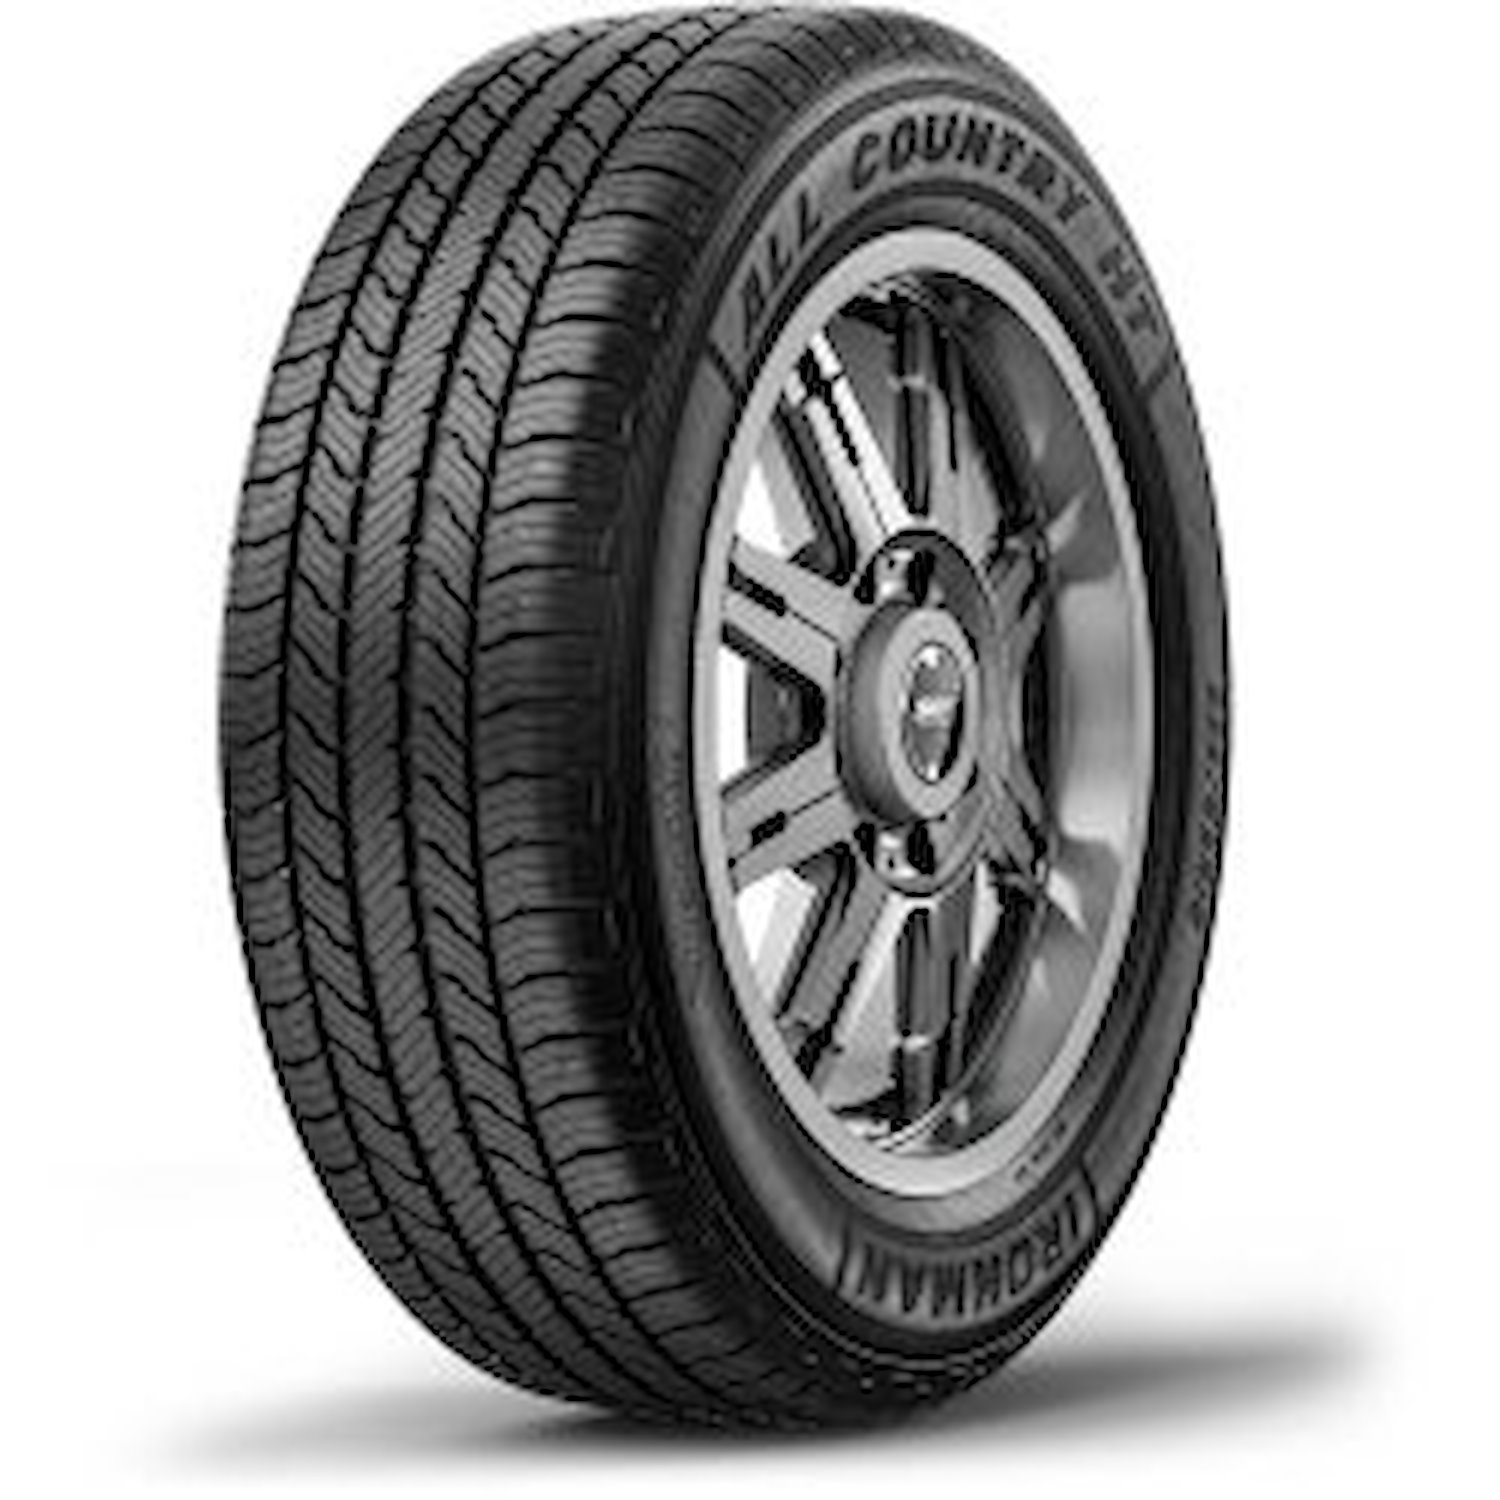 03058 All Country HT Tire, 265/65R18, 114T